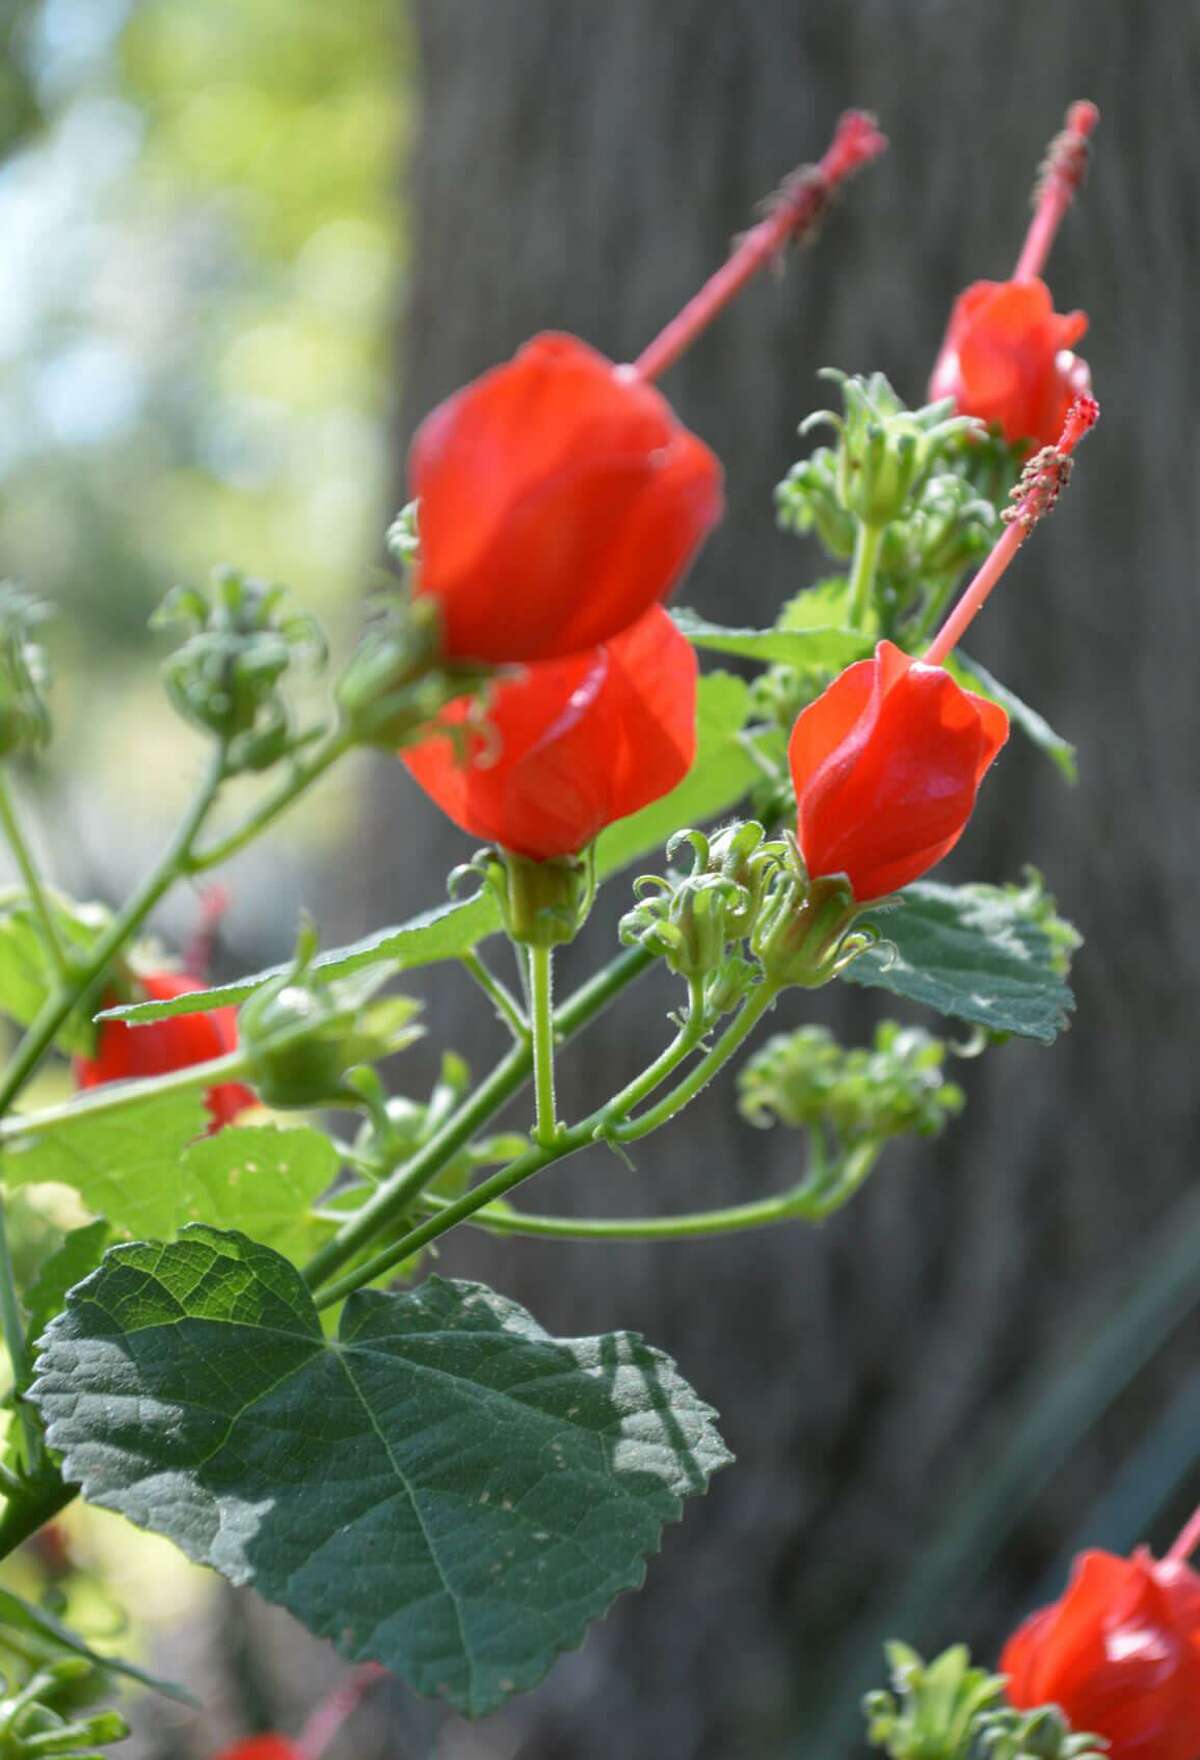 Turk’s cap grows 2 to 3 feet tall and prefers partial shade. It gets bright red flowers and got its name because the flower resembles a Turkish turban.